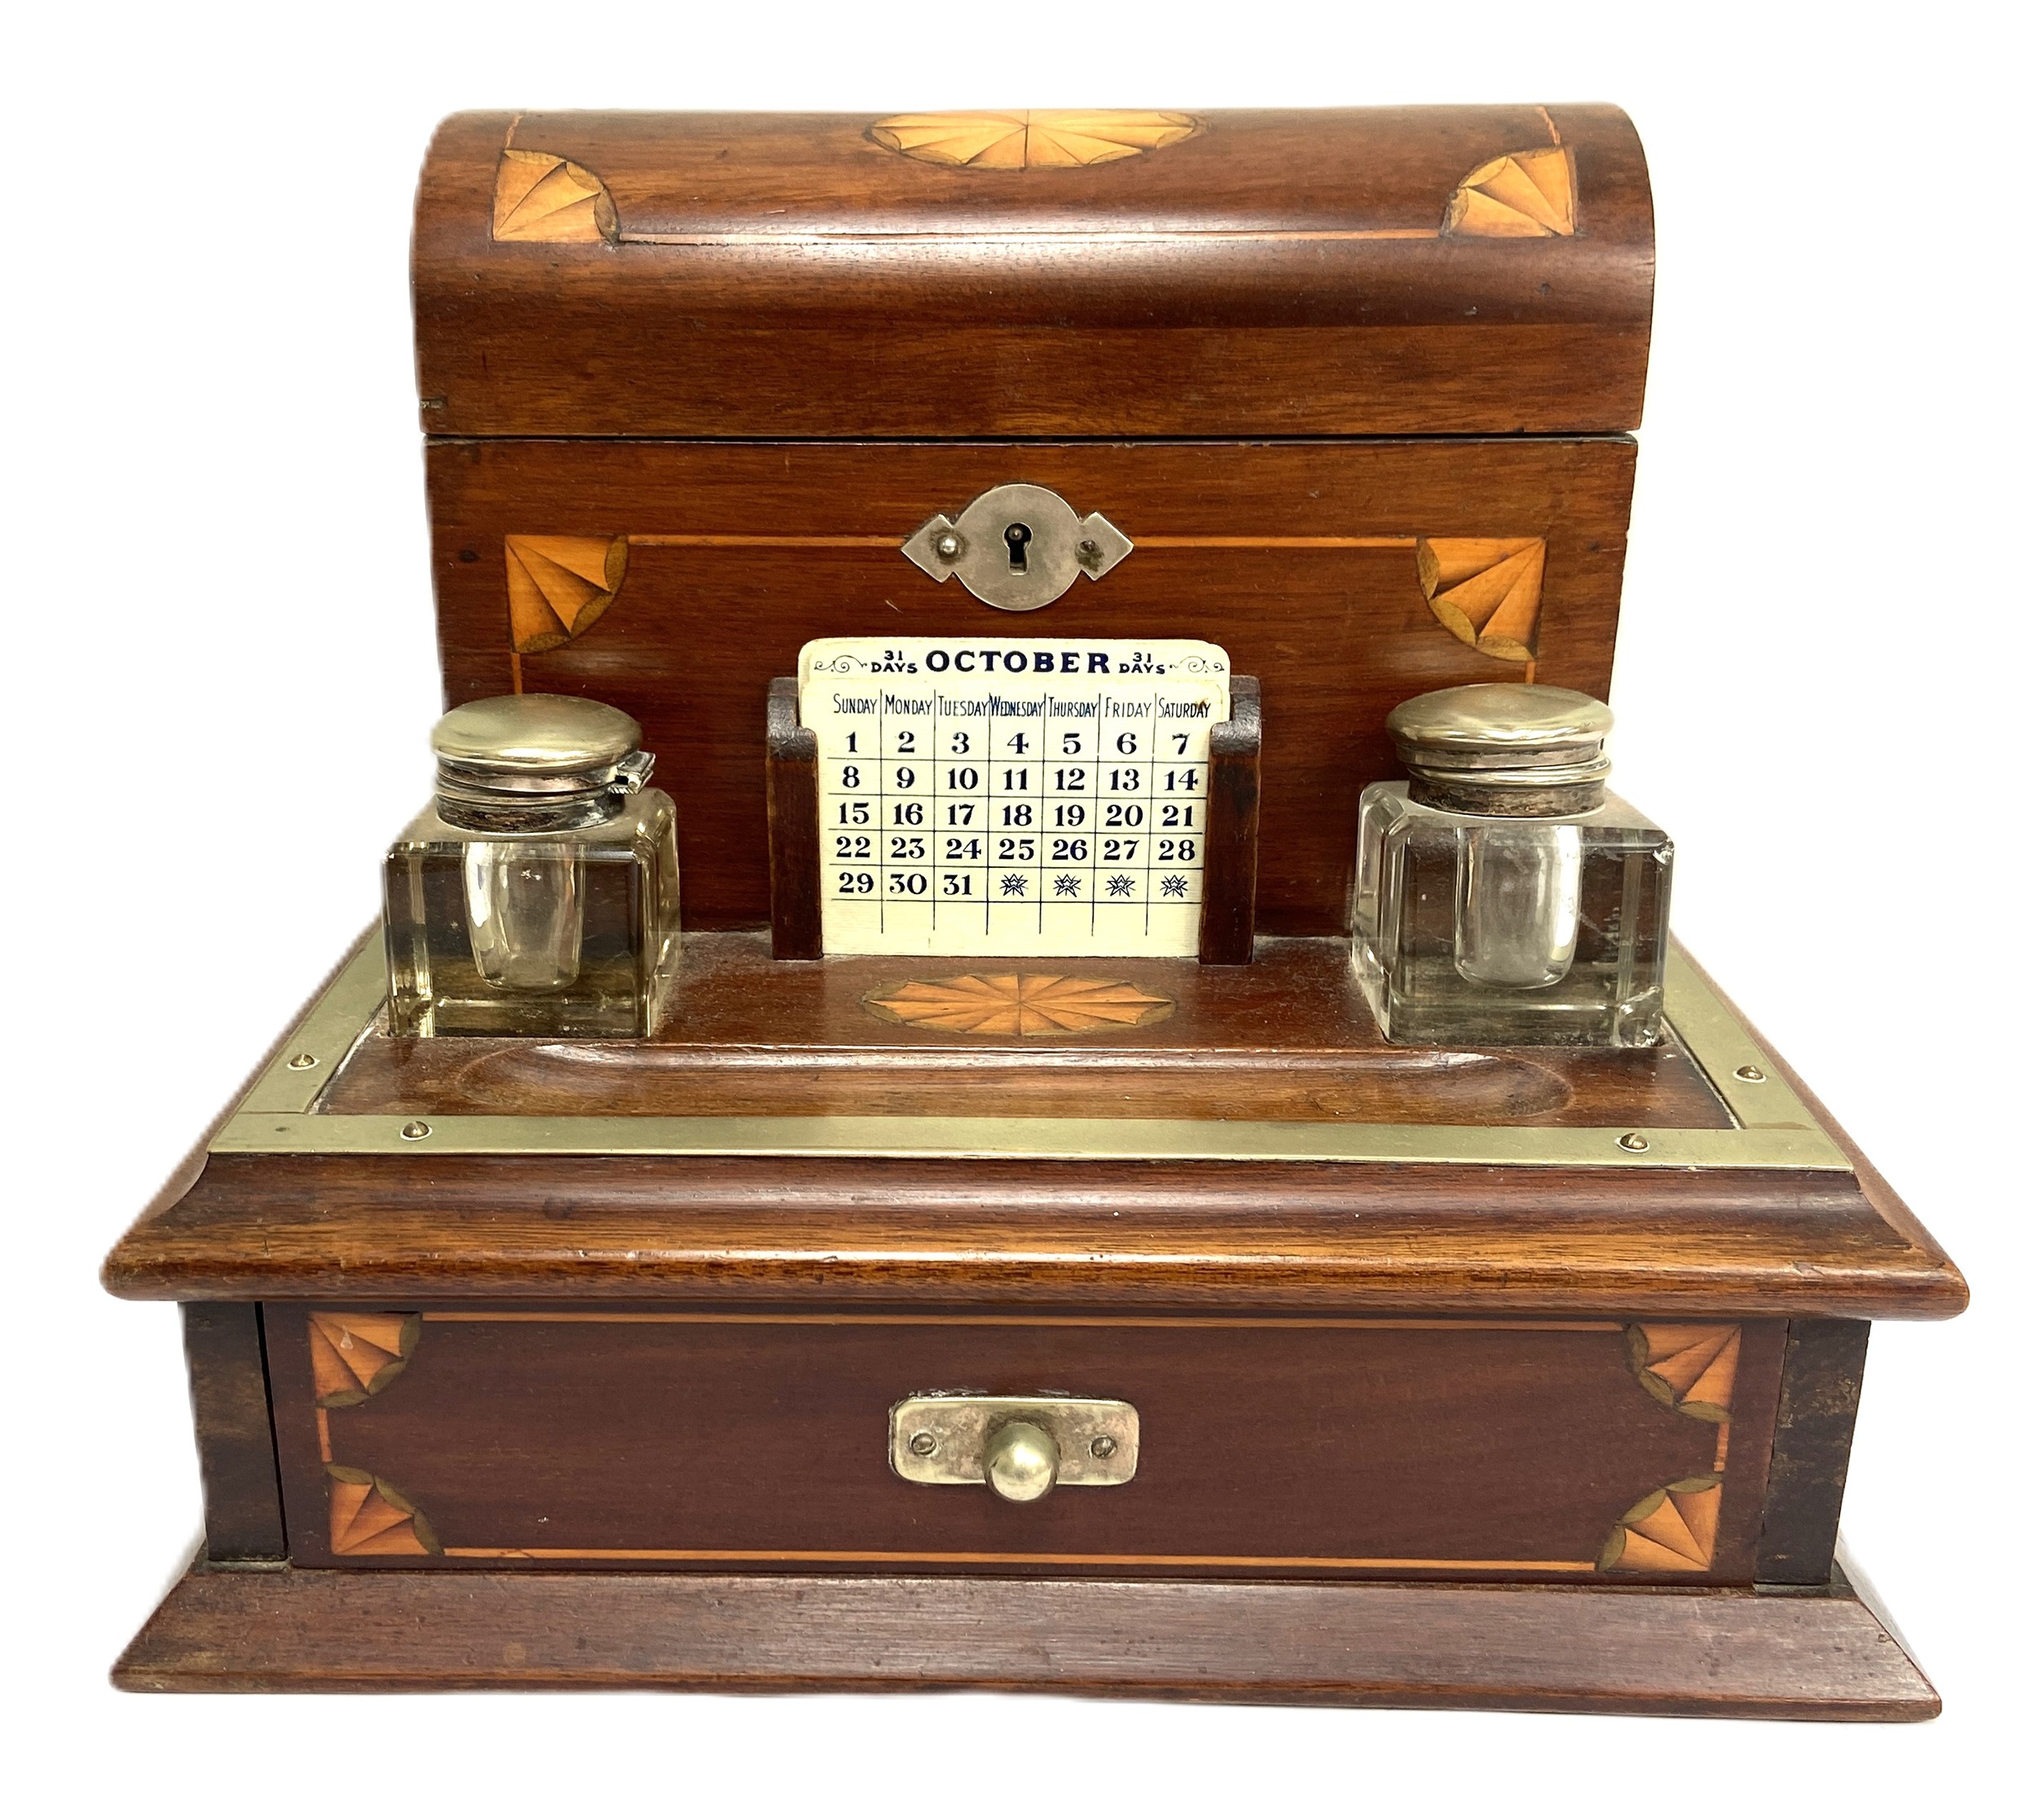 A late Victorian mahogany desktop stationary / inkstand, late 19th century, with an inlaid domed